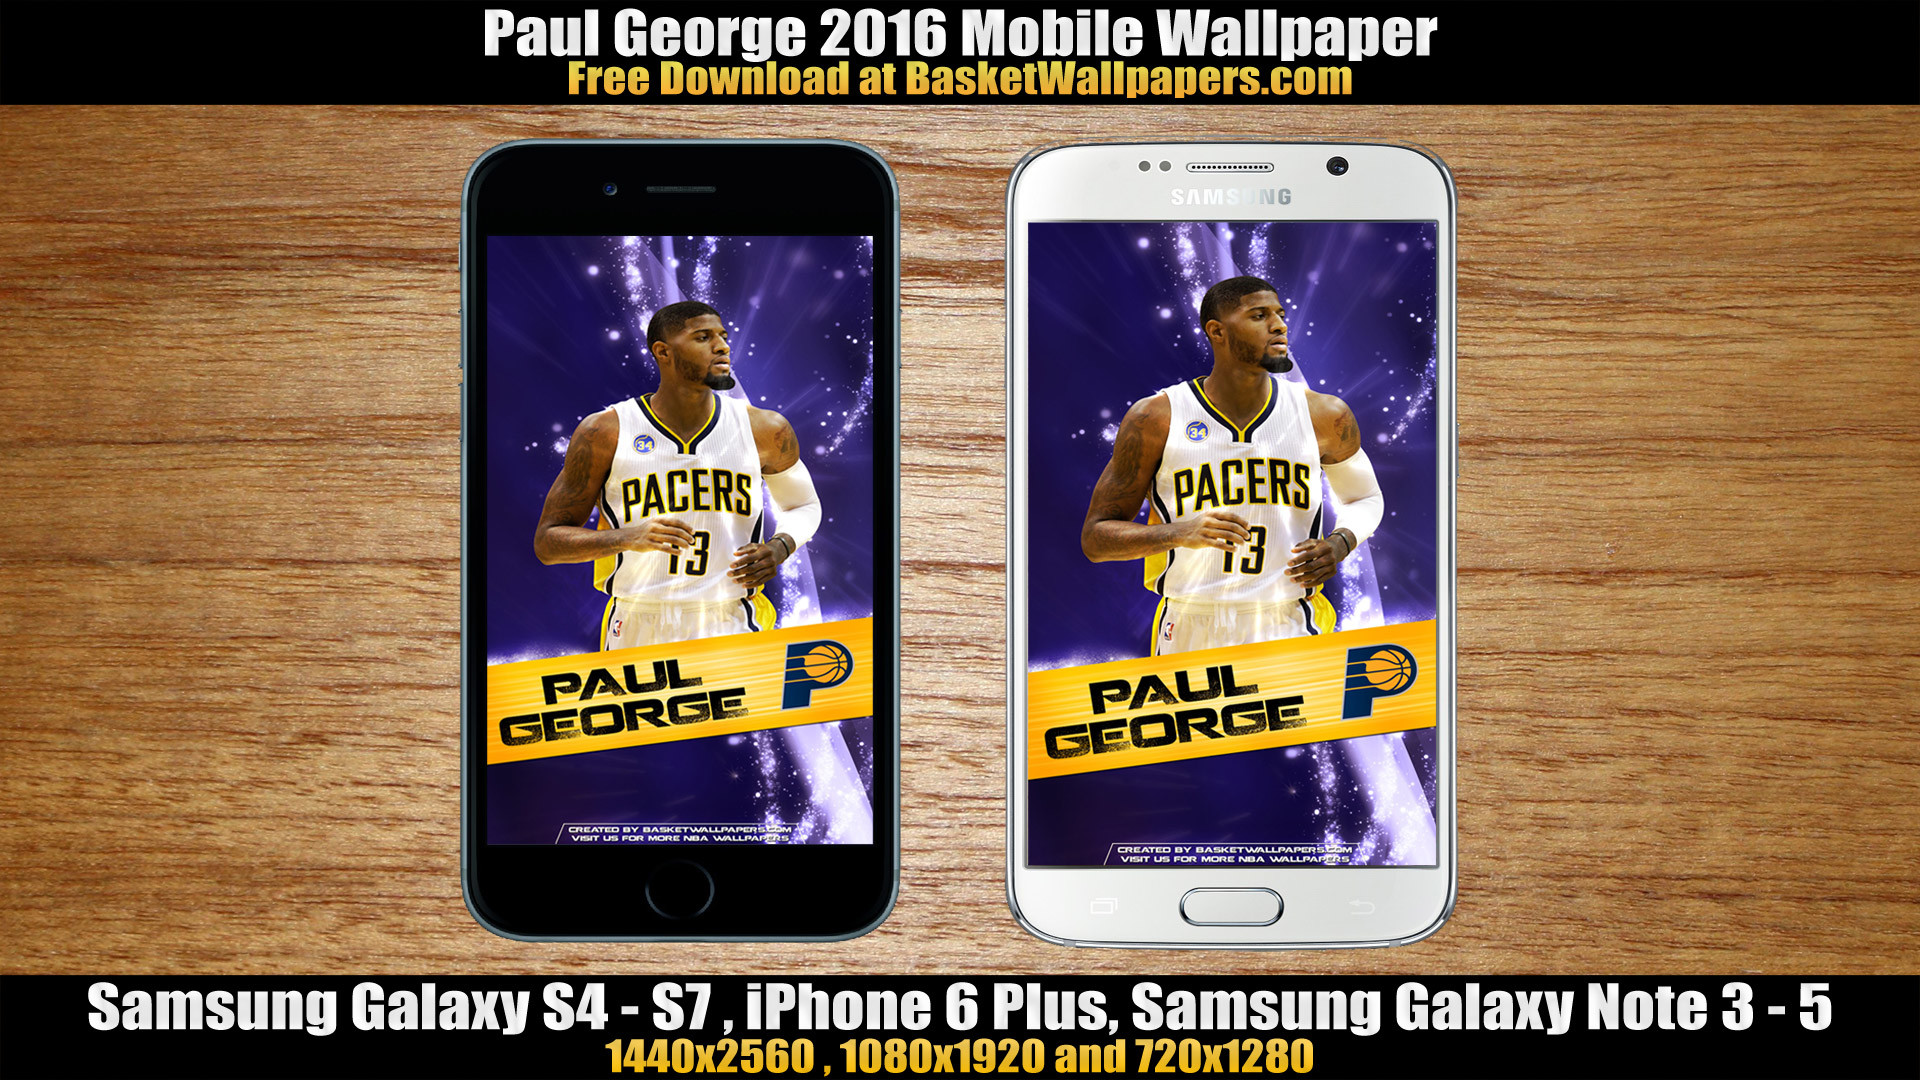 1920x1080 Paul George Indiana Pacers 2016 Mobile Wallpaper